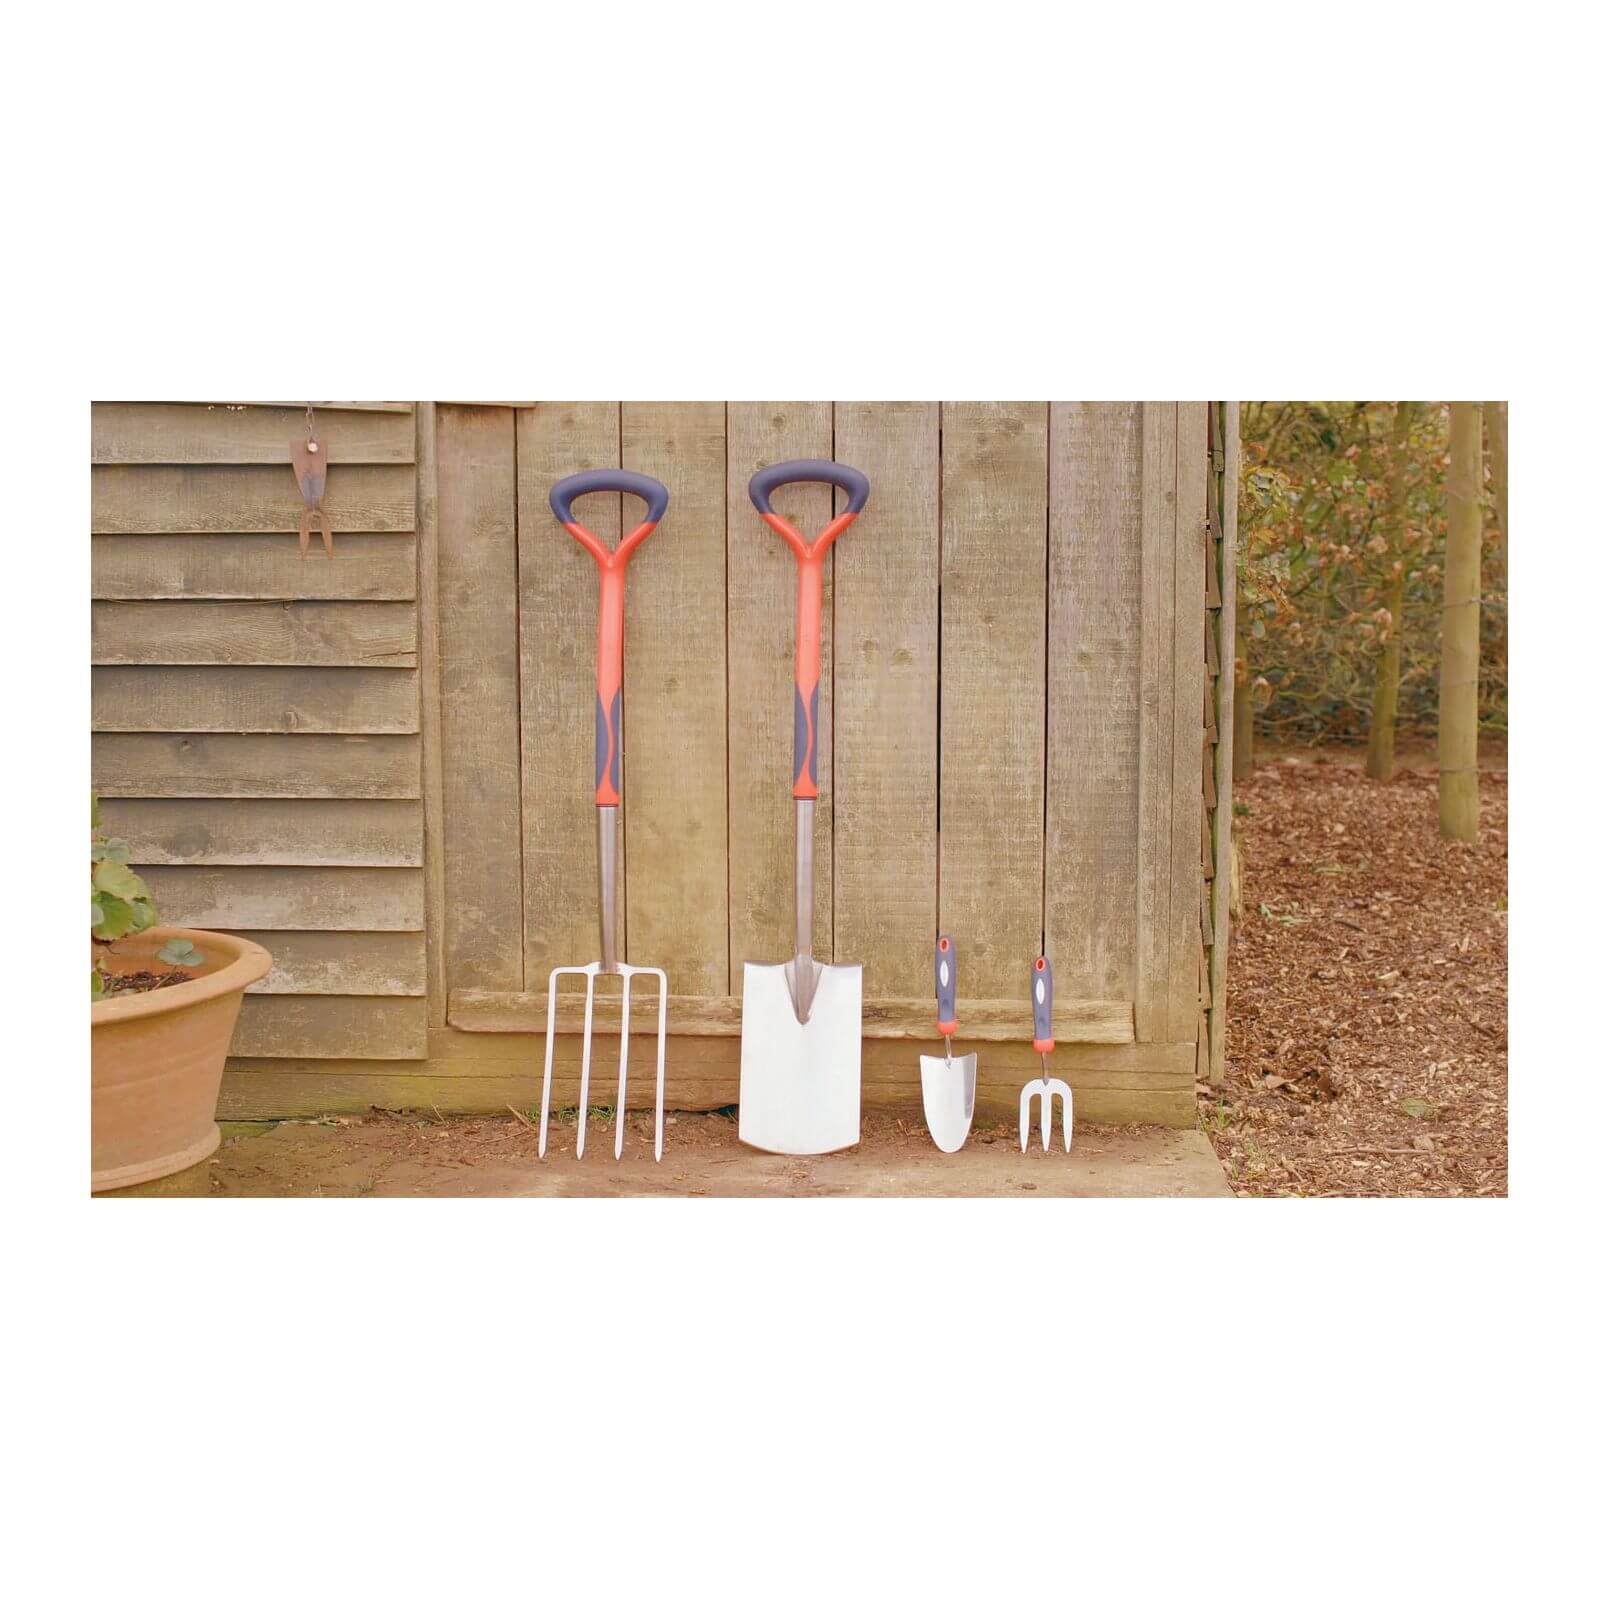 Spear & Jackson Select Stainless Steel Digging Spade